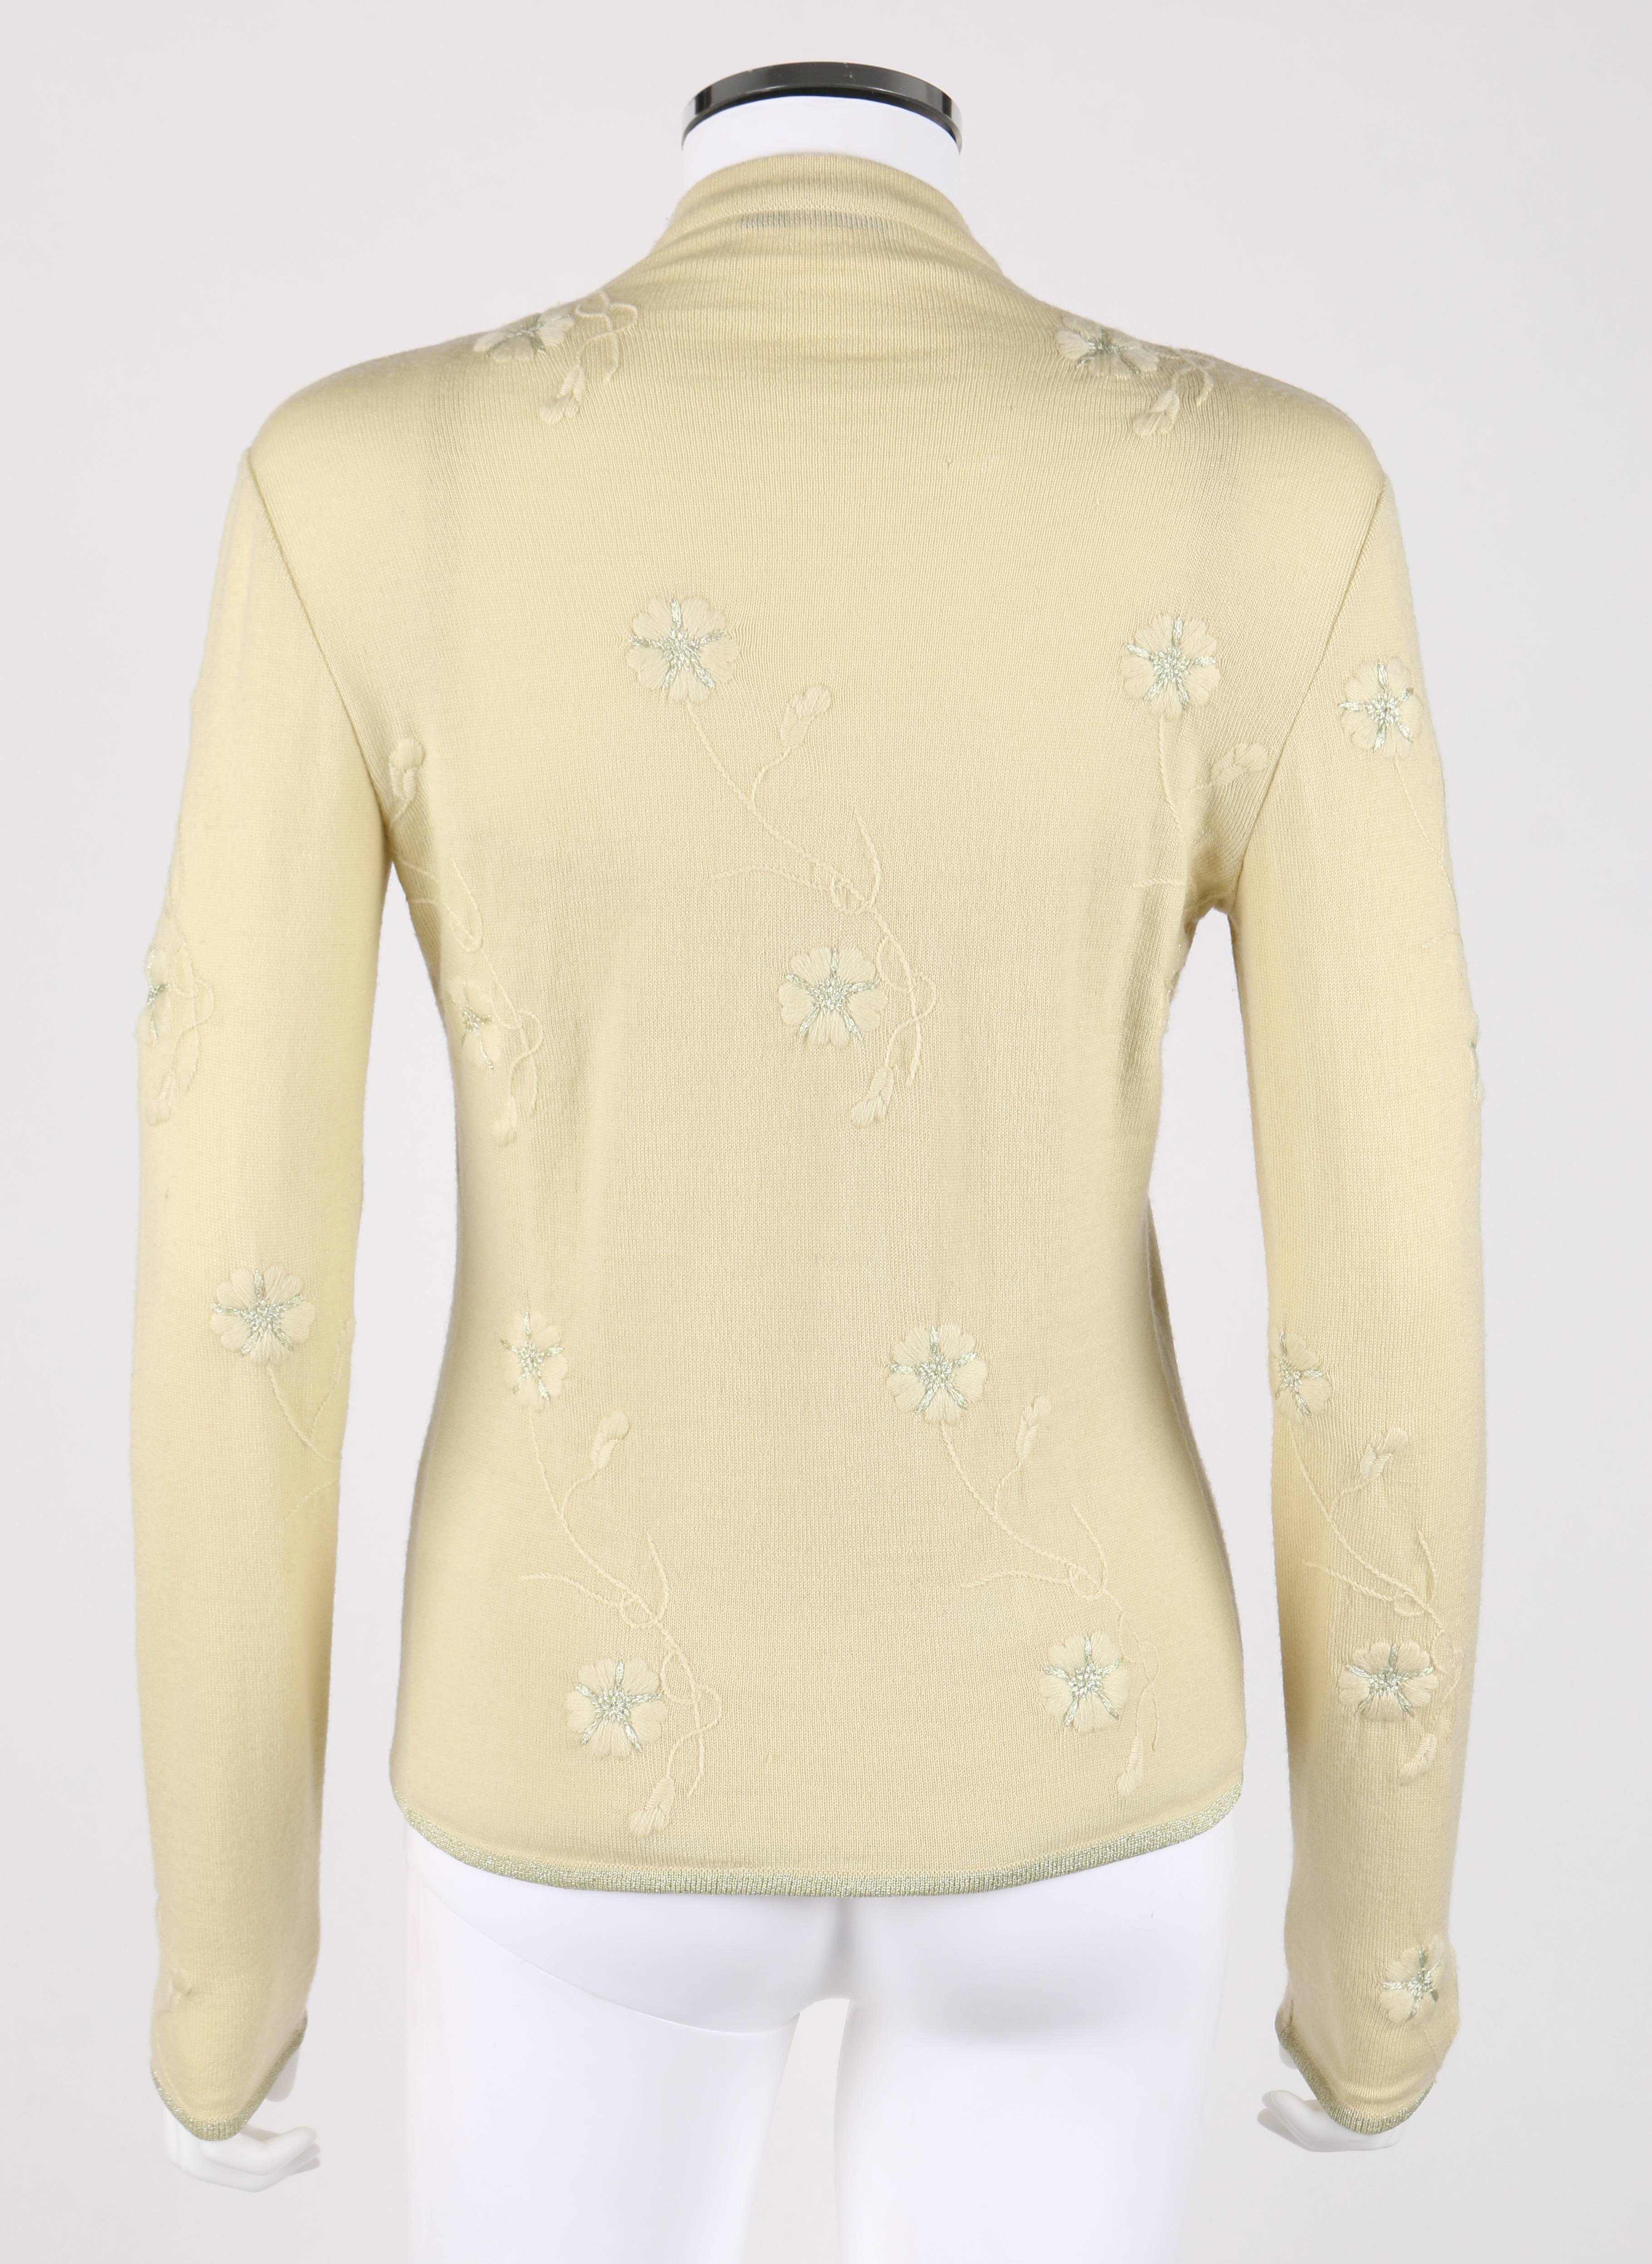 GIVENCHY Couture S/S 1998 ALEXANDER MCQUEEN Pale Yellow Floral Cardigan ...